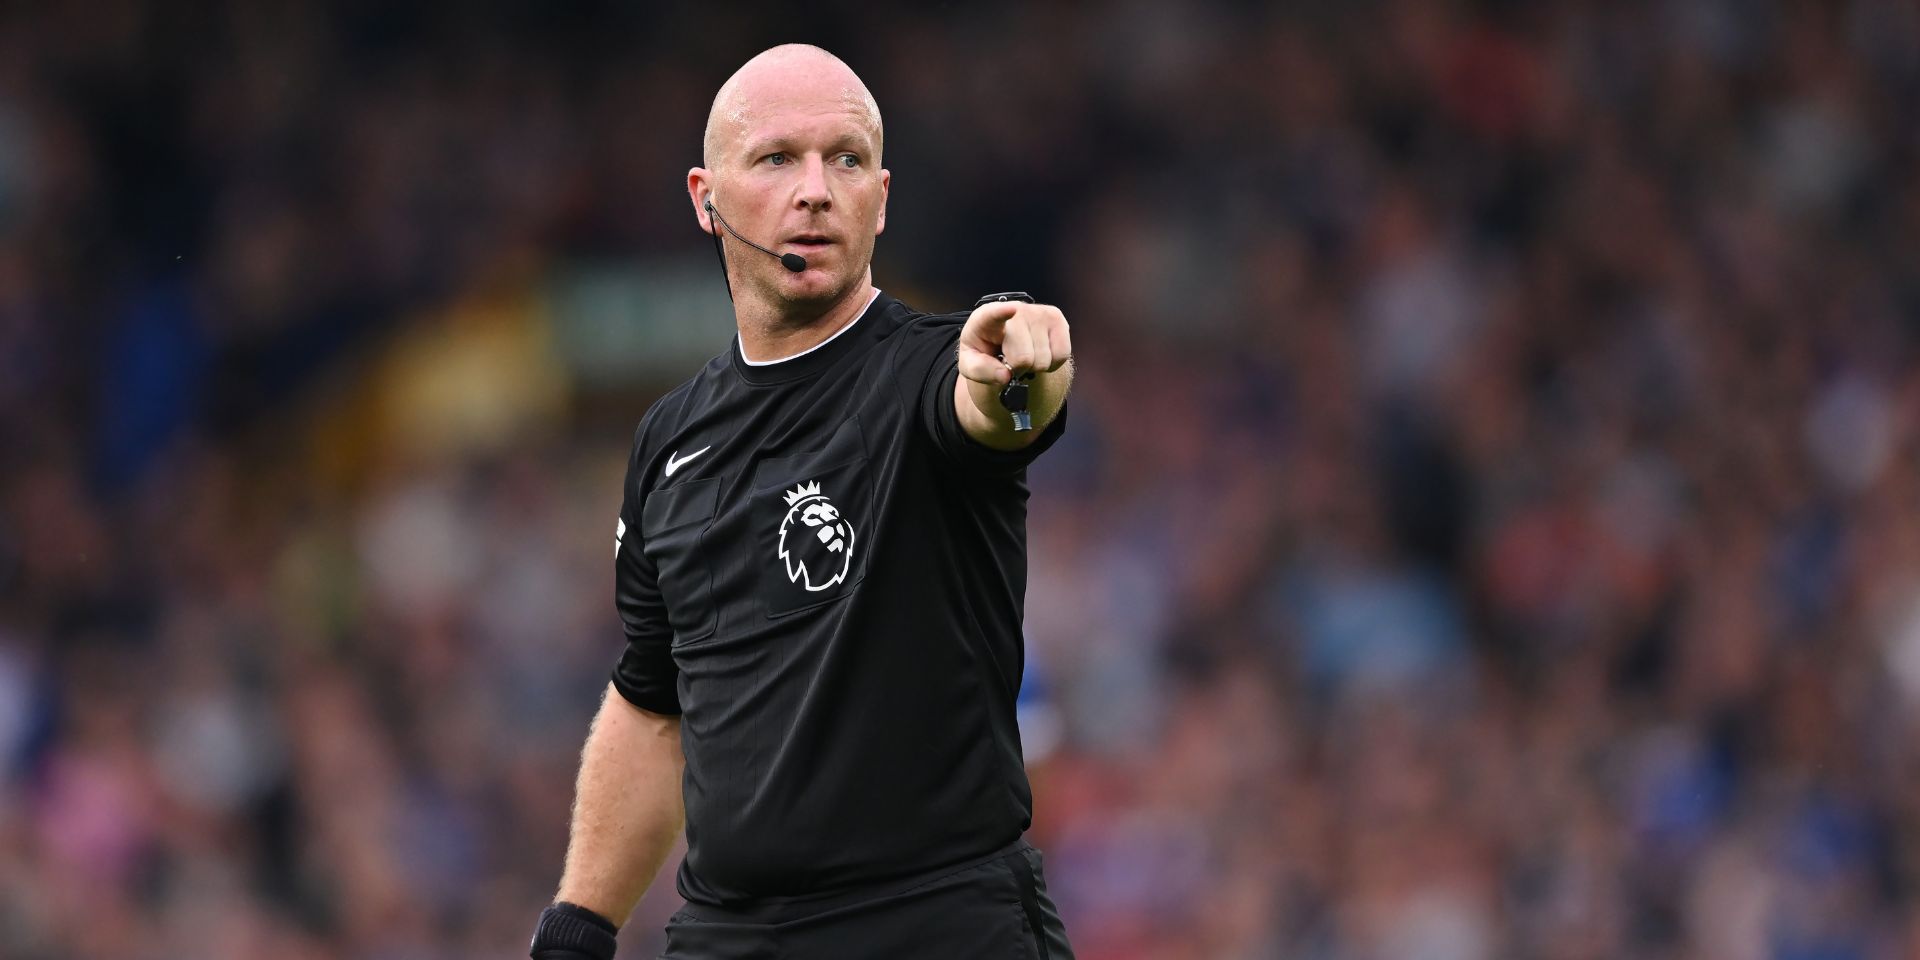 Simon Hooper had a frustrating night officiating the game between Tottenham and Liverpool.